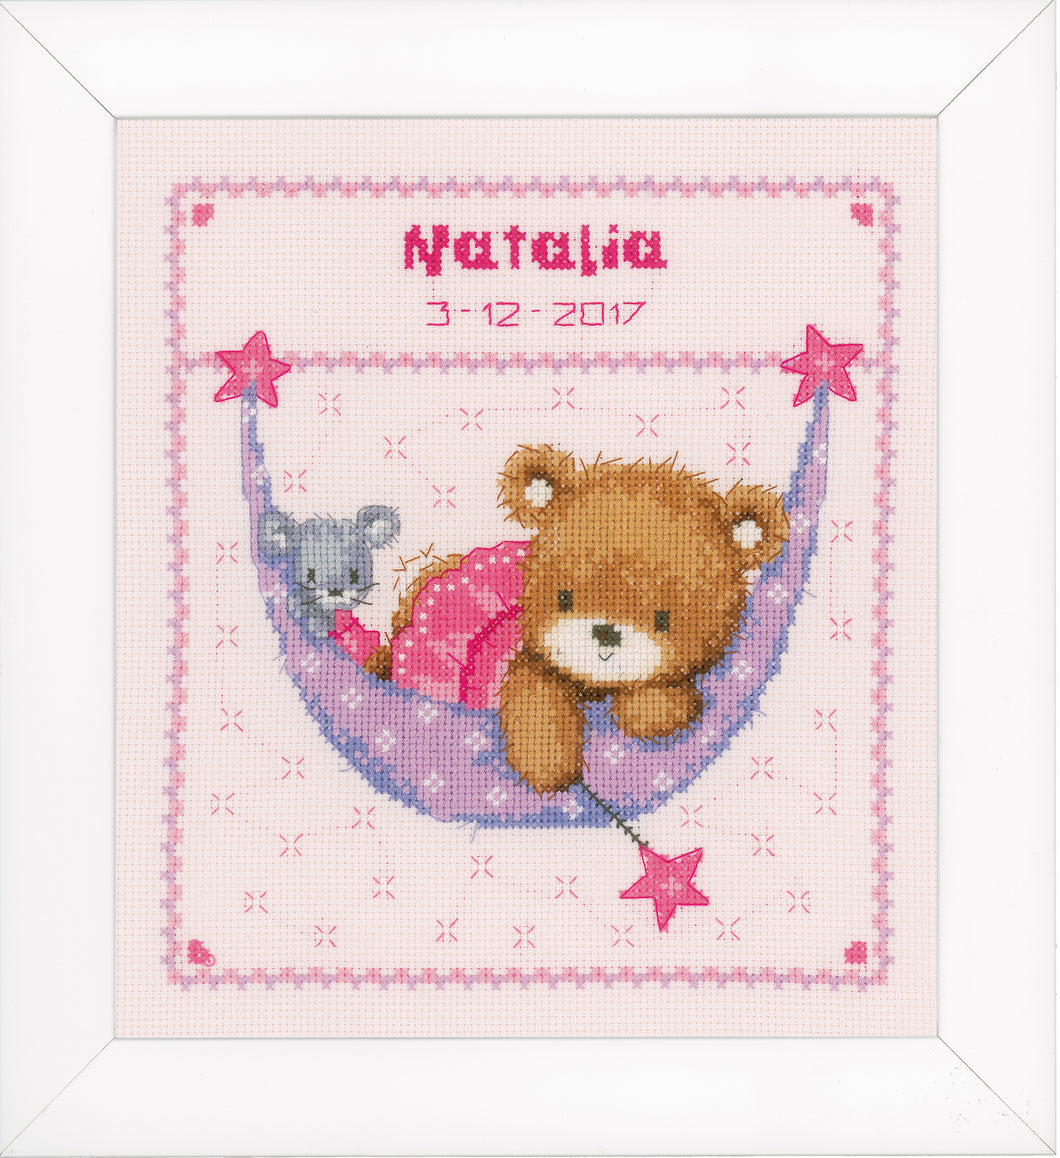 Counted Cross Stitch Kit ~ Birth Record ~ Little Bear in Hammock (Pink)